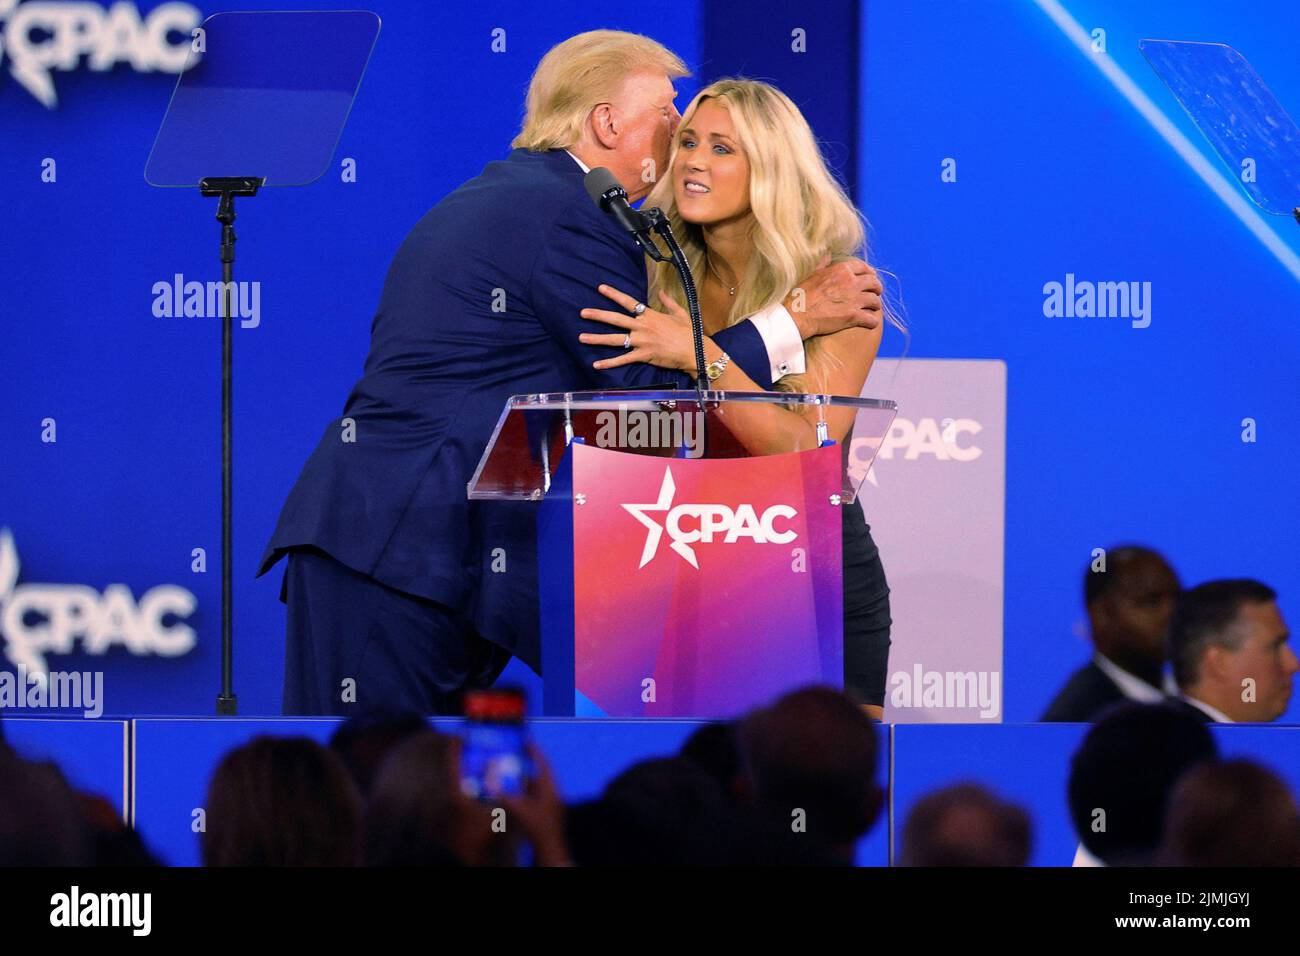 Former U.S. President Donald Trump is joined onstage by SEC champion swimmer Riley Gaines at the Conservative Political Action Conference (CPAC) in Dallas, Texas, U.S., August 6, 2022.  REUTERS/Brian Snyder Stock Photo